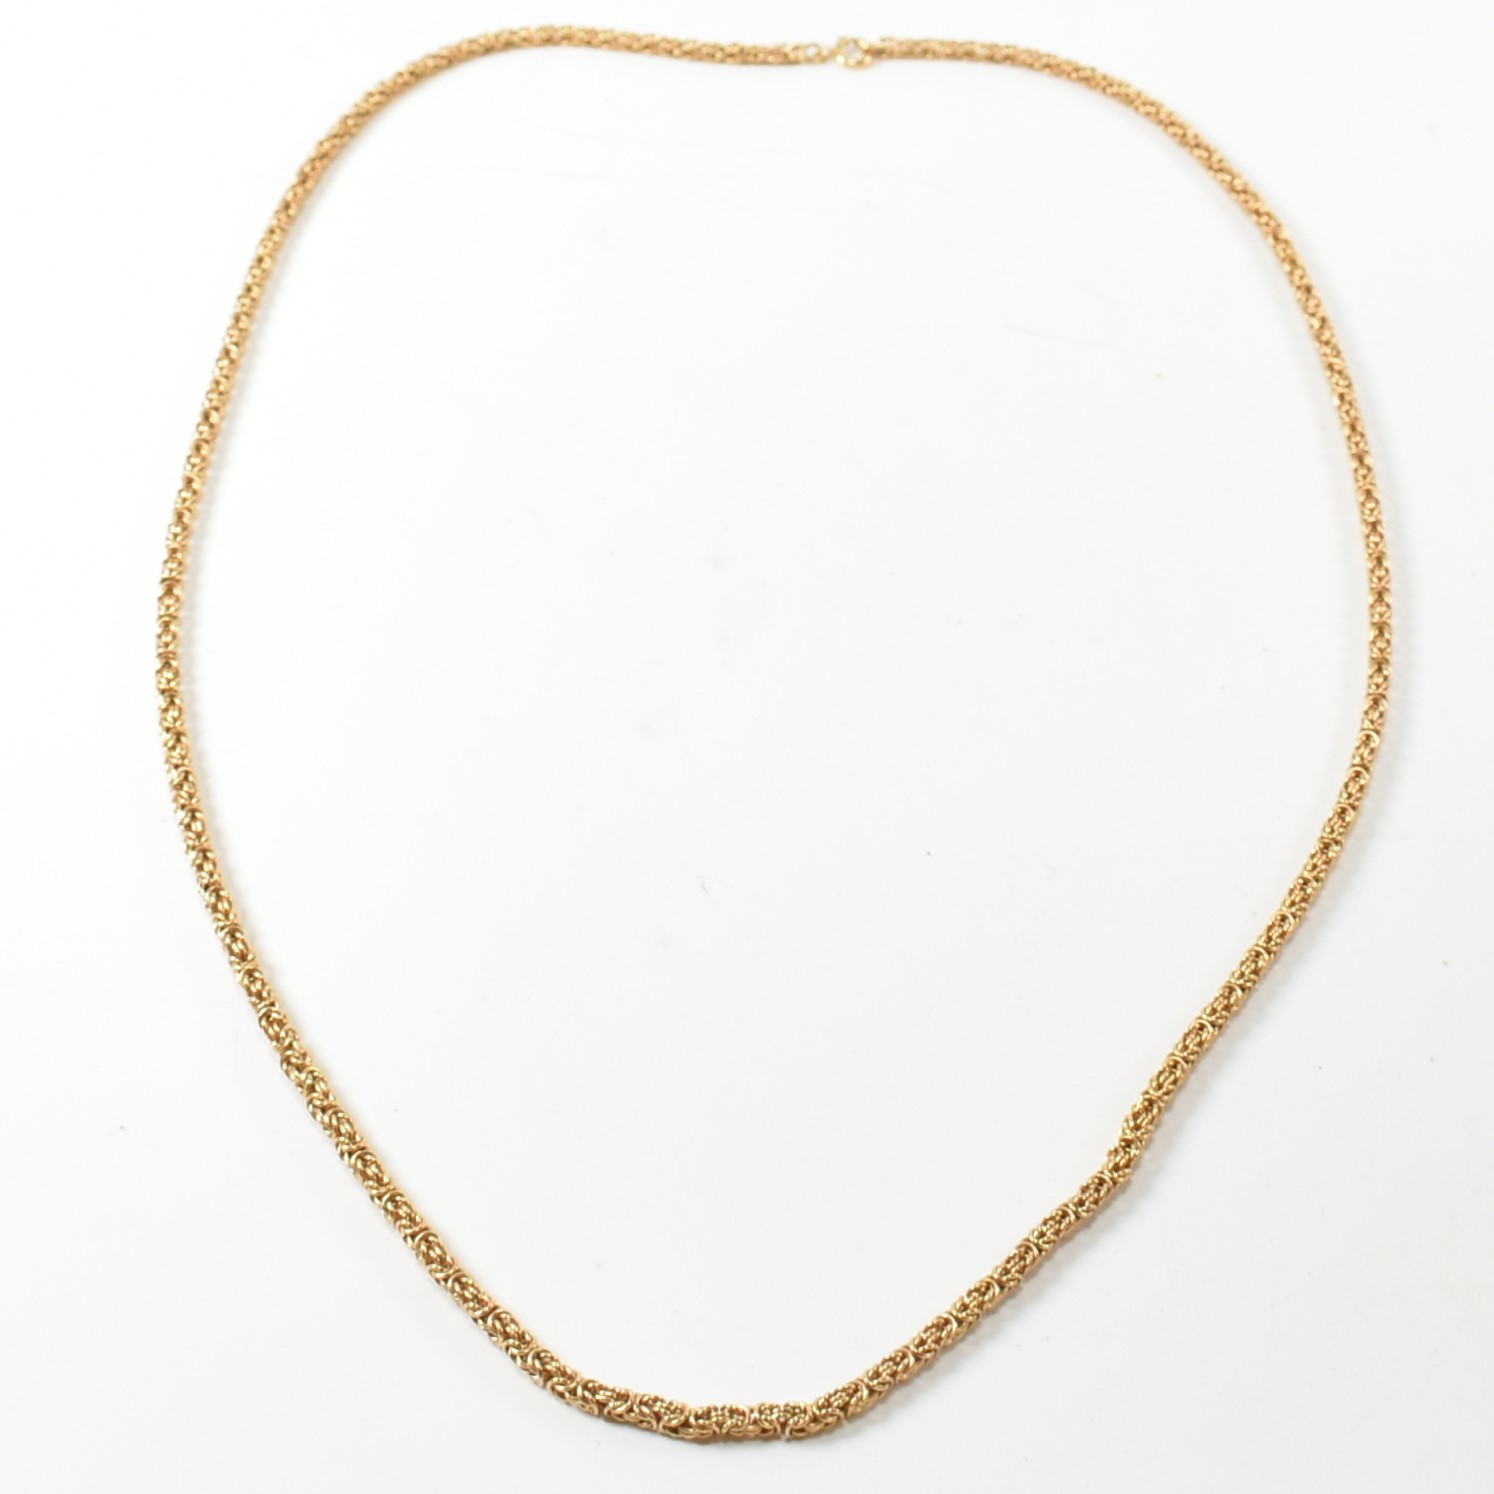 PORTUGUESE 19.2CT GOLD BYZANTINE CHAIN NECKLACE - Image 3 of 4